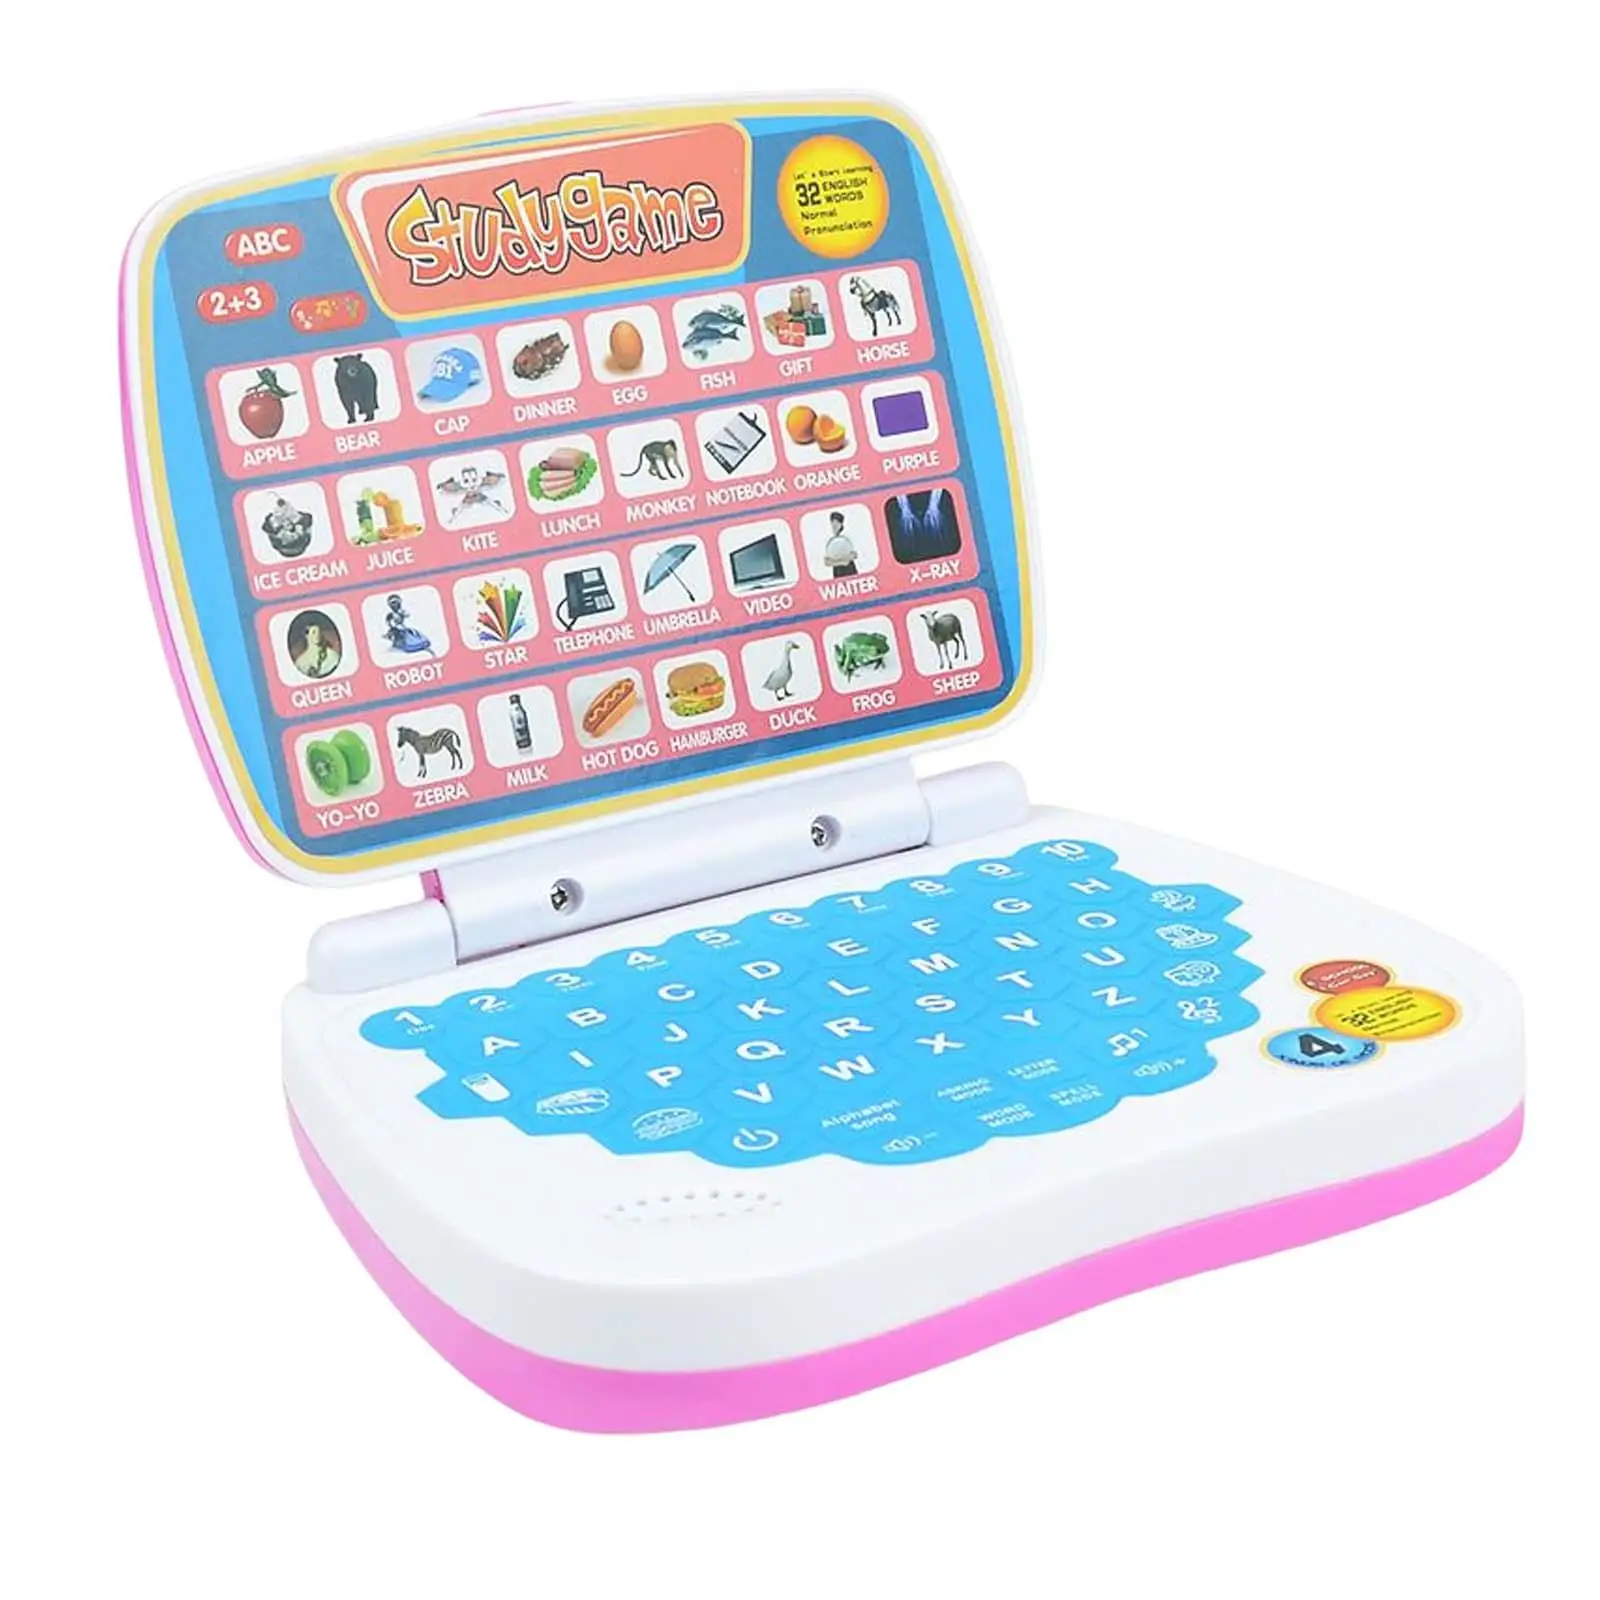 Multifunction Child Interactive Learning Pad Tablet Study Game Computer Kids Laptop Toy for Toddler Girls Boys Kids